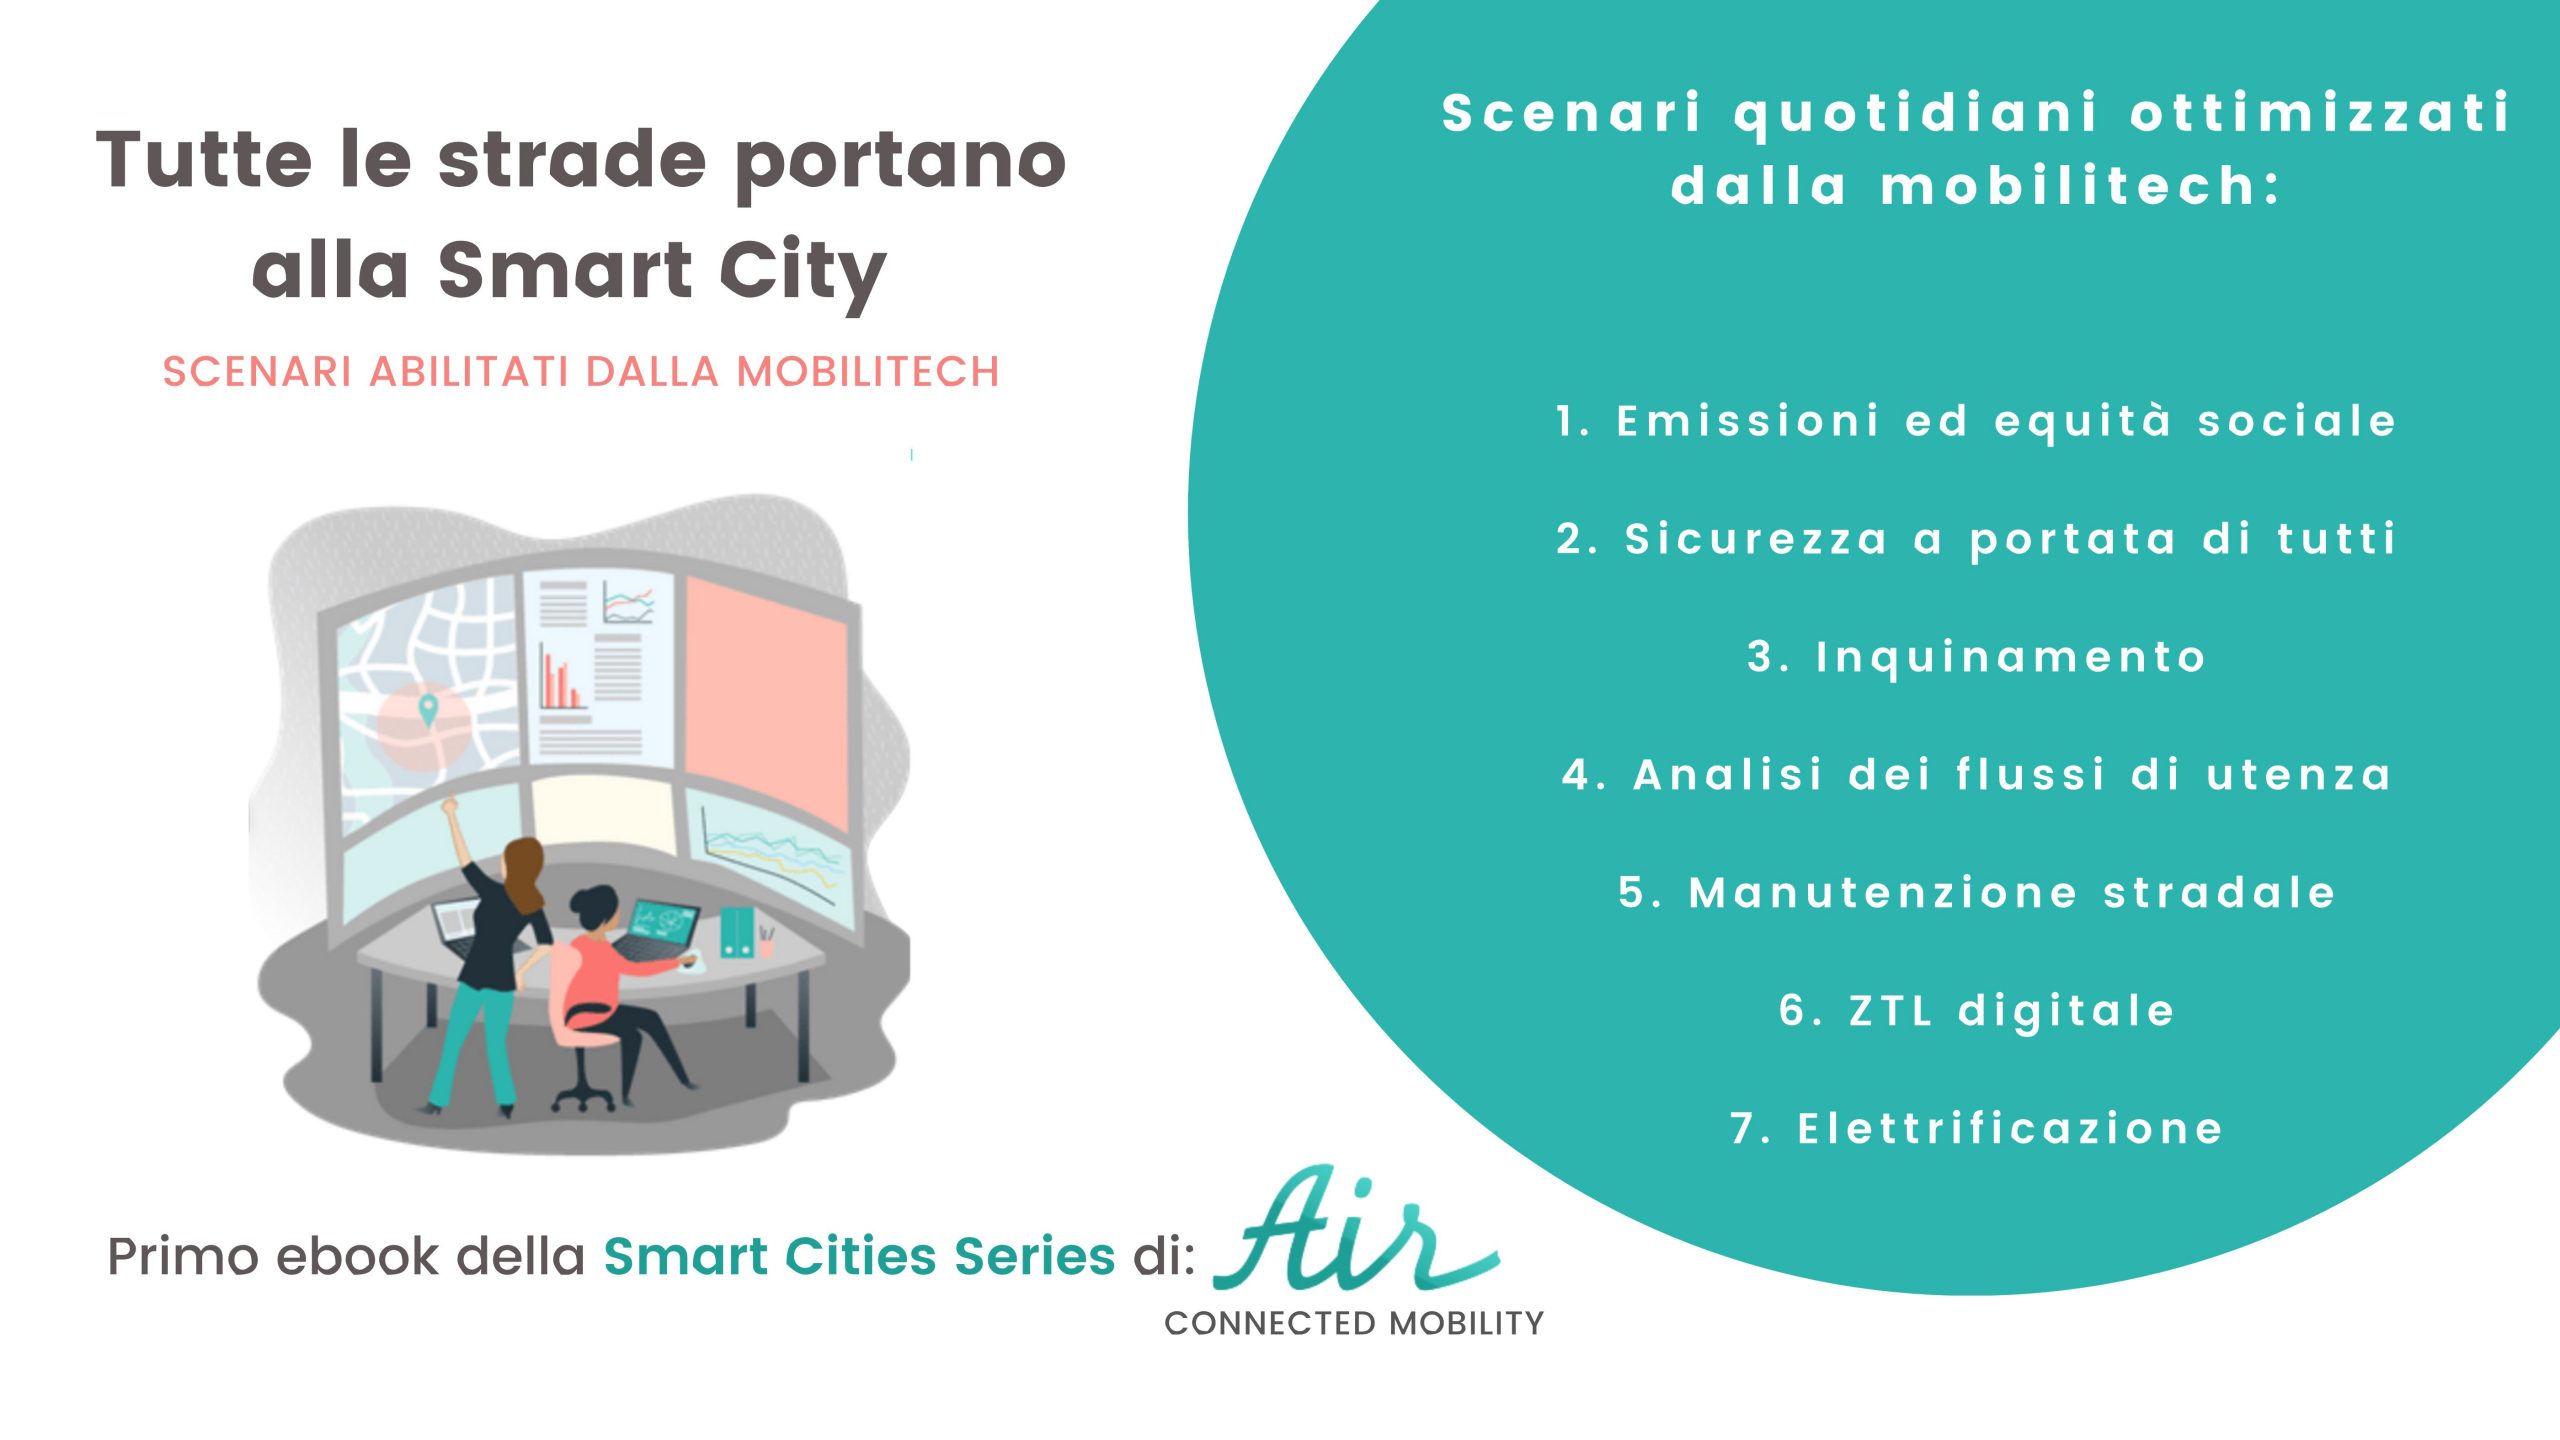 Air- Connected Mobility lancia la nuova Smart City Series